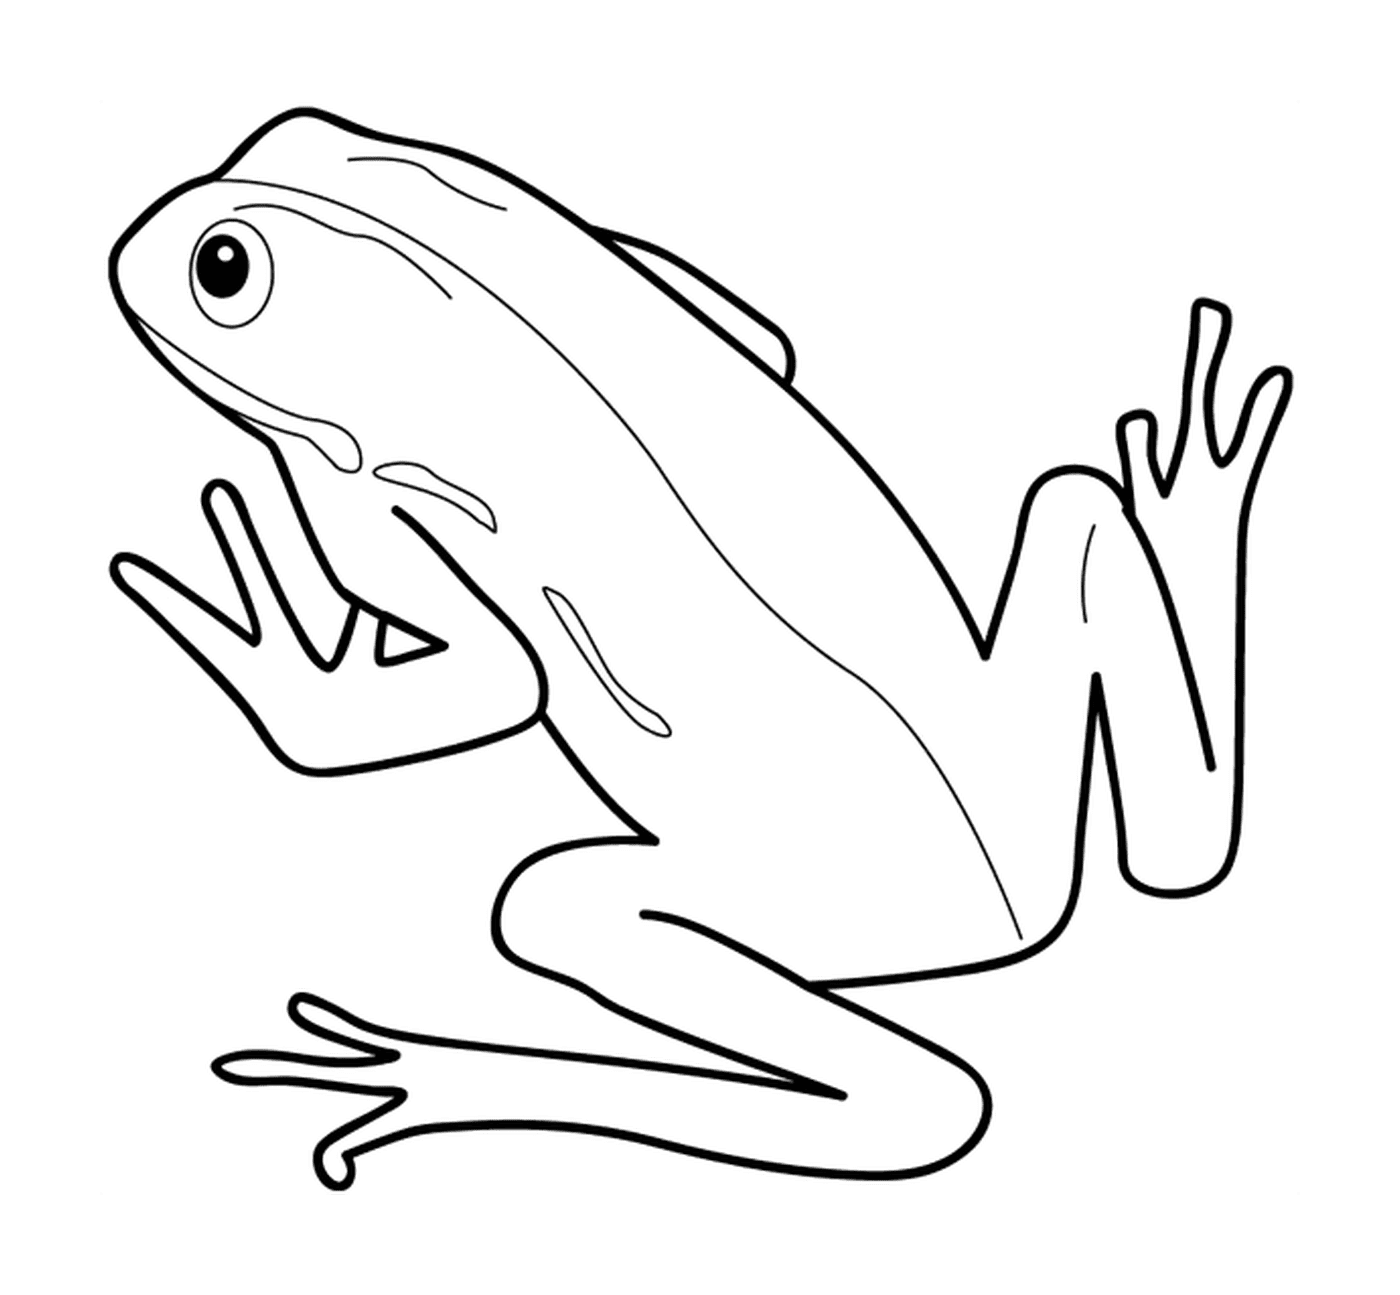  A frog 